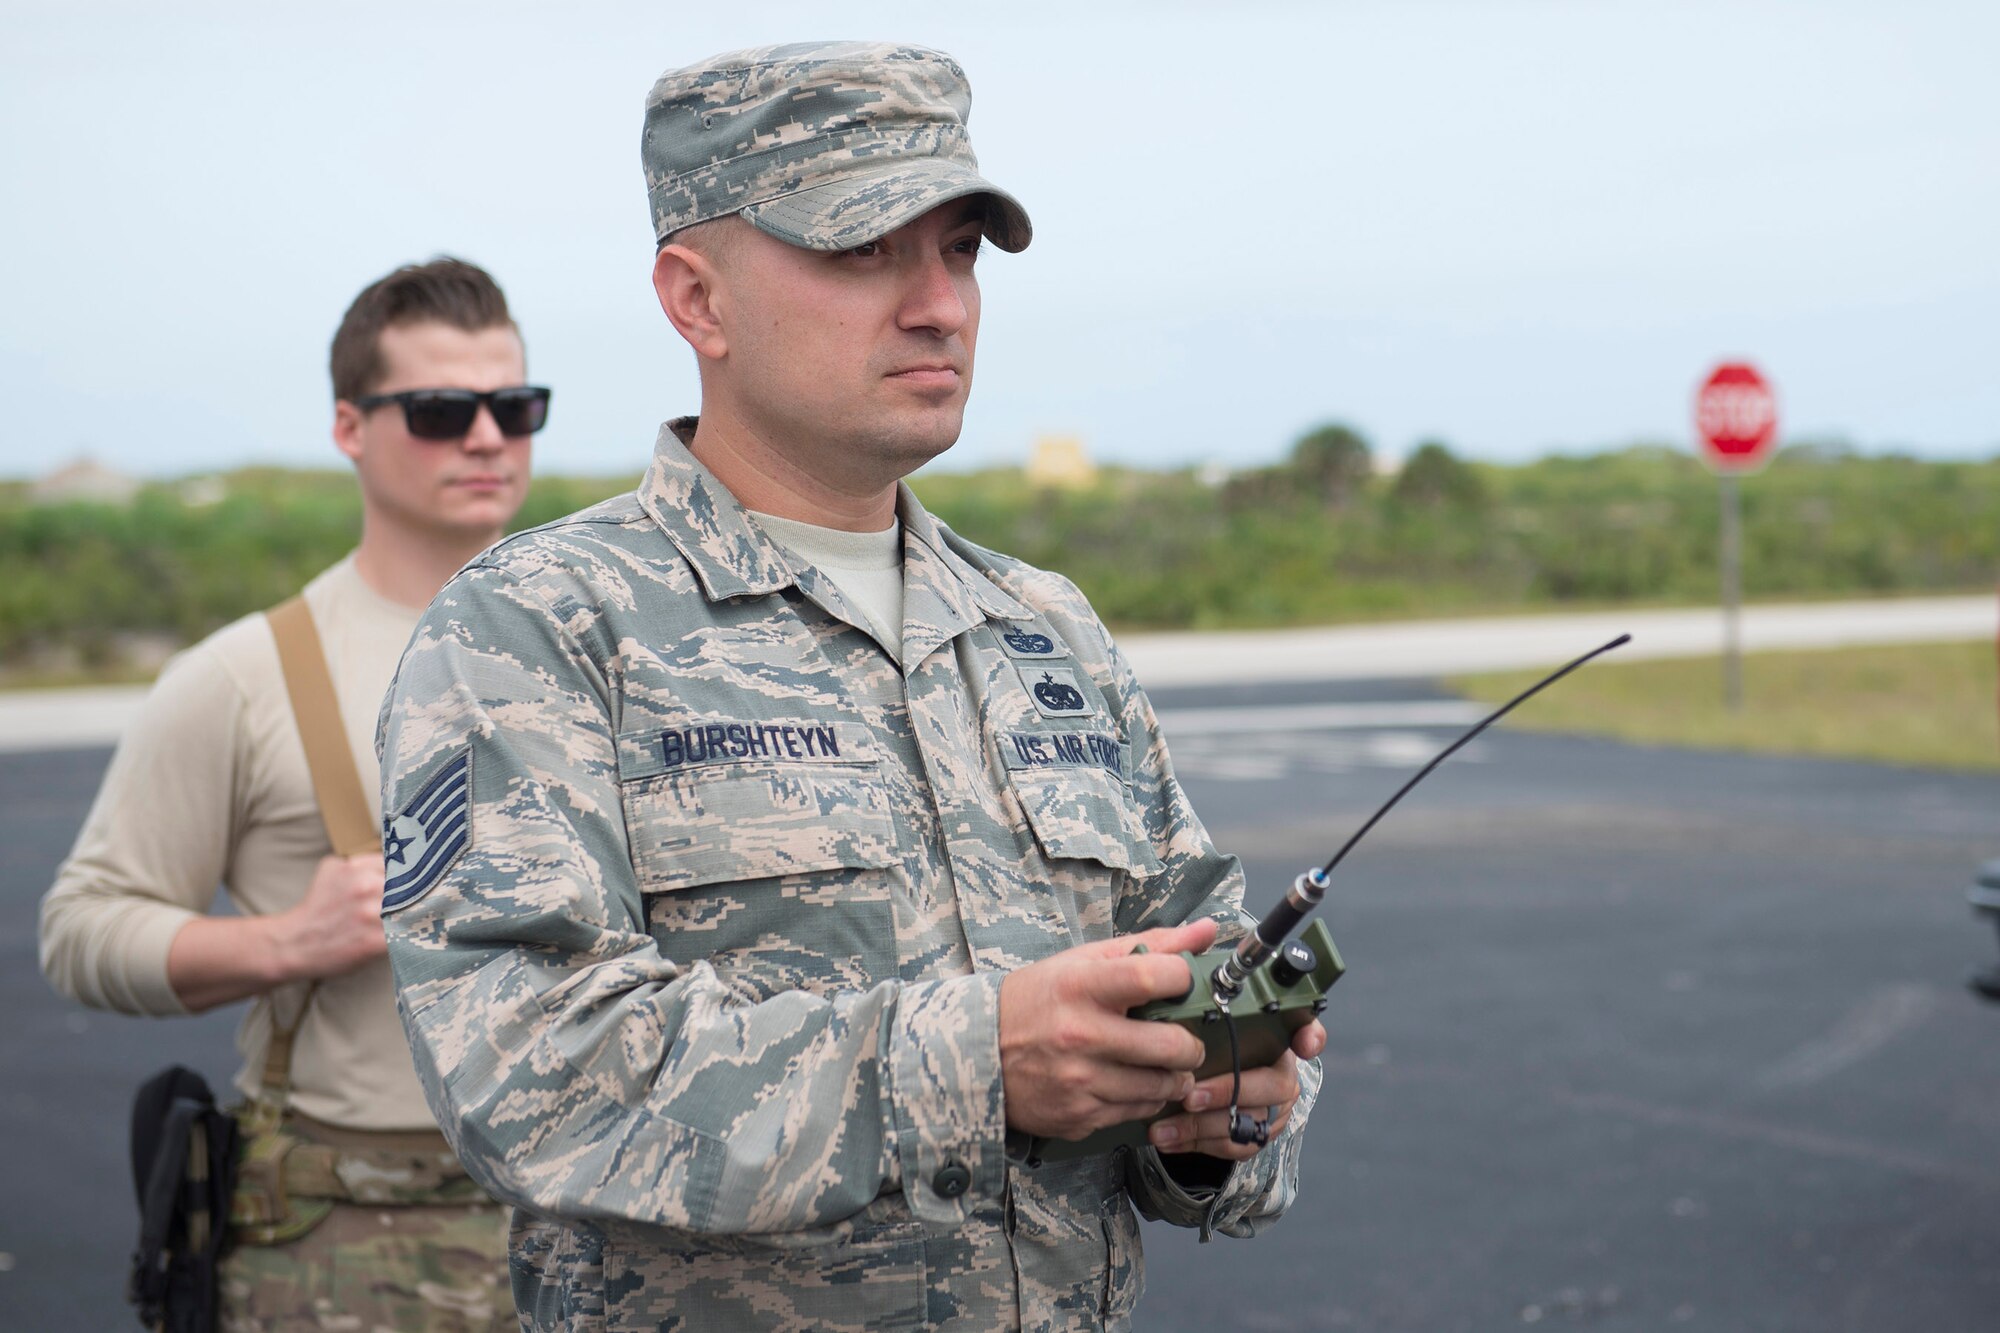 Tech. Sgt. Dmitriy Burshteyn, a field test team noncommissioned officer in charge with the Air Force Technical Applications Center, uses a remote firing device to detonate explosives while field testing new infrasound equipment at Cape Canaveral Air Force Station, Fla.  (U.S. Air Force photo by Matthew S. Jurgens)